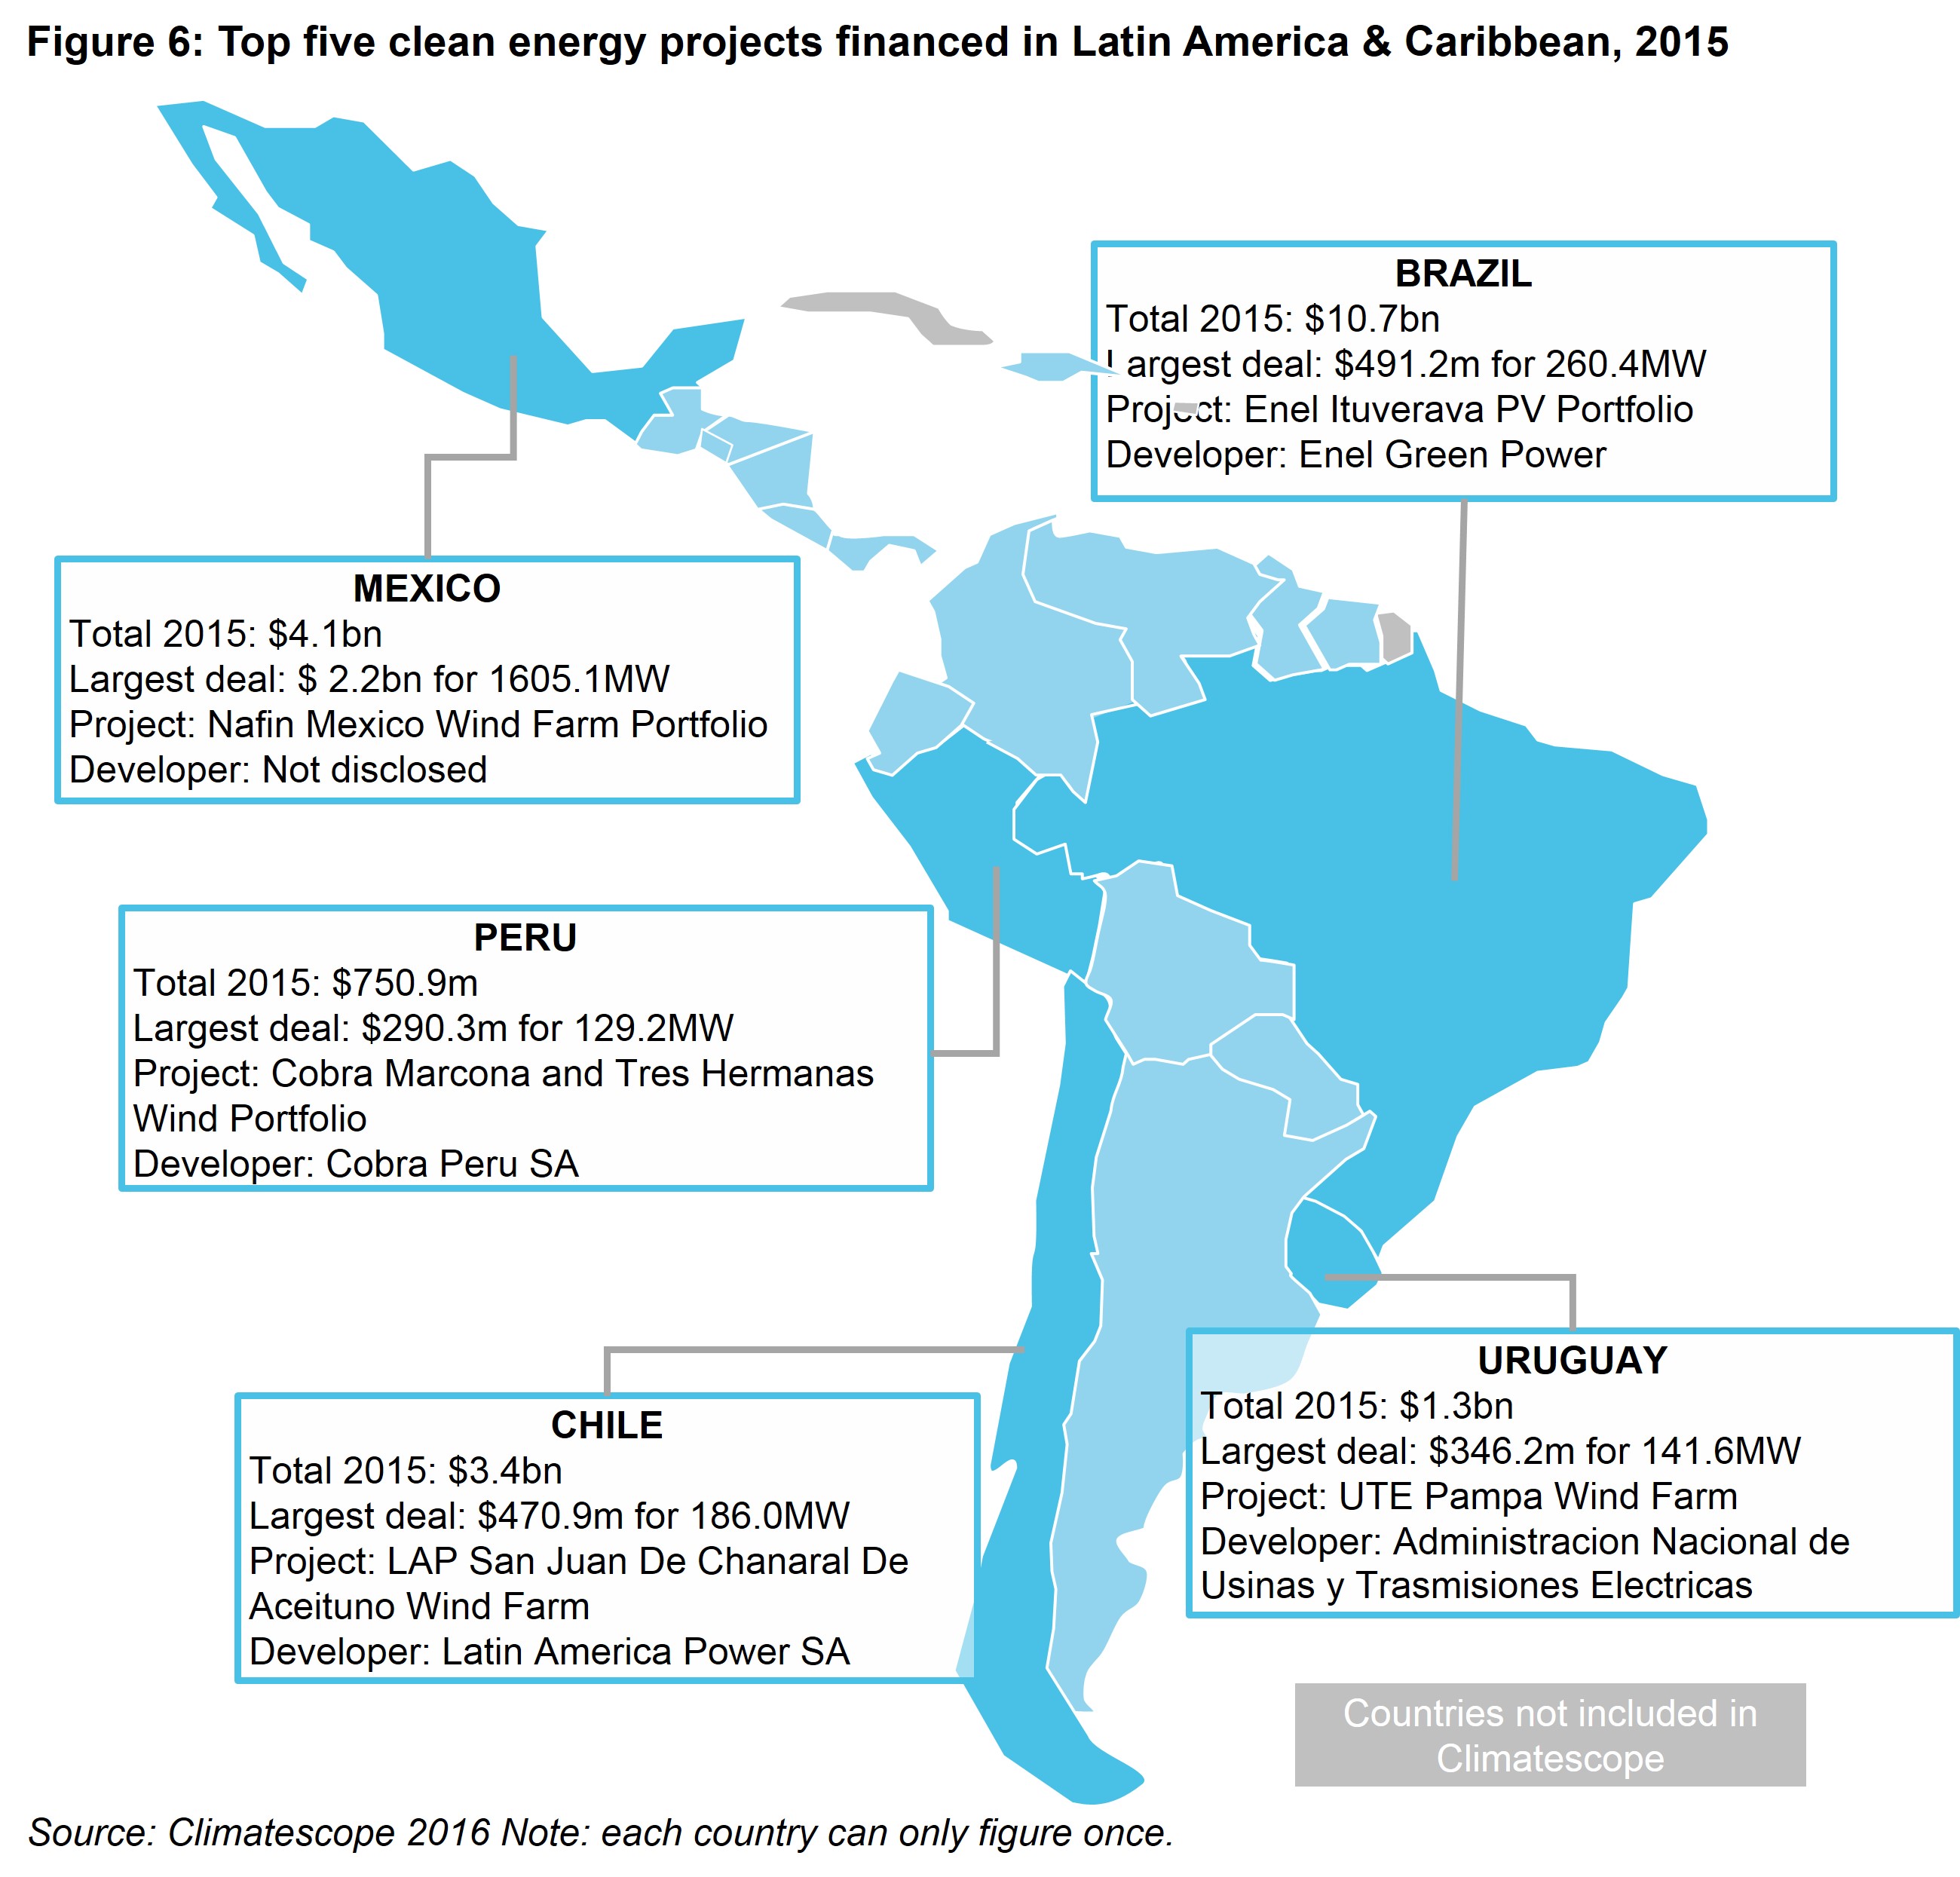 LAC Fig 6 - Top five clean energy projects financed in Latin America & Caribbean, 2015